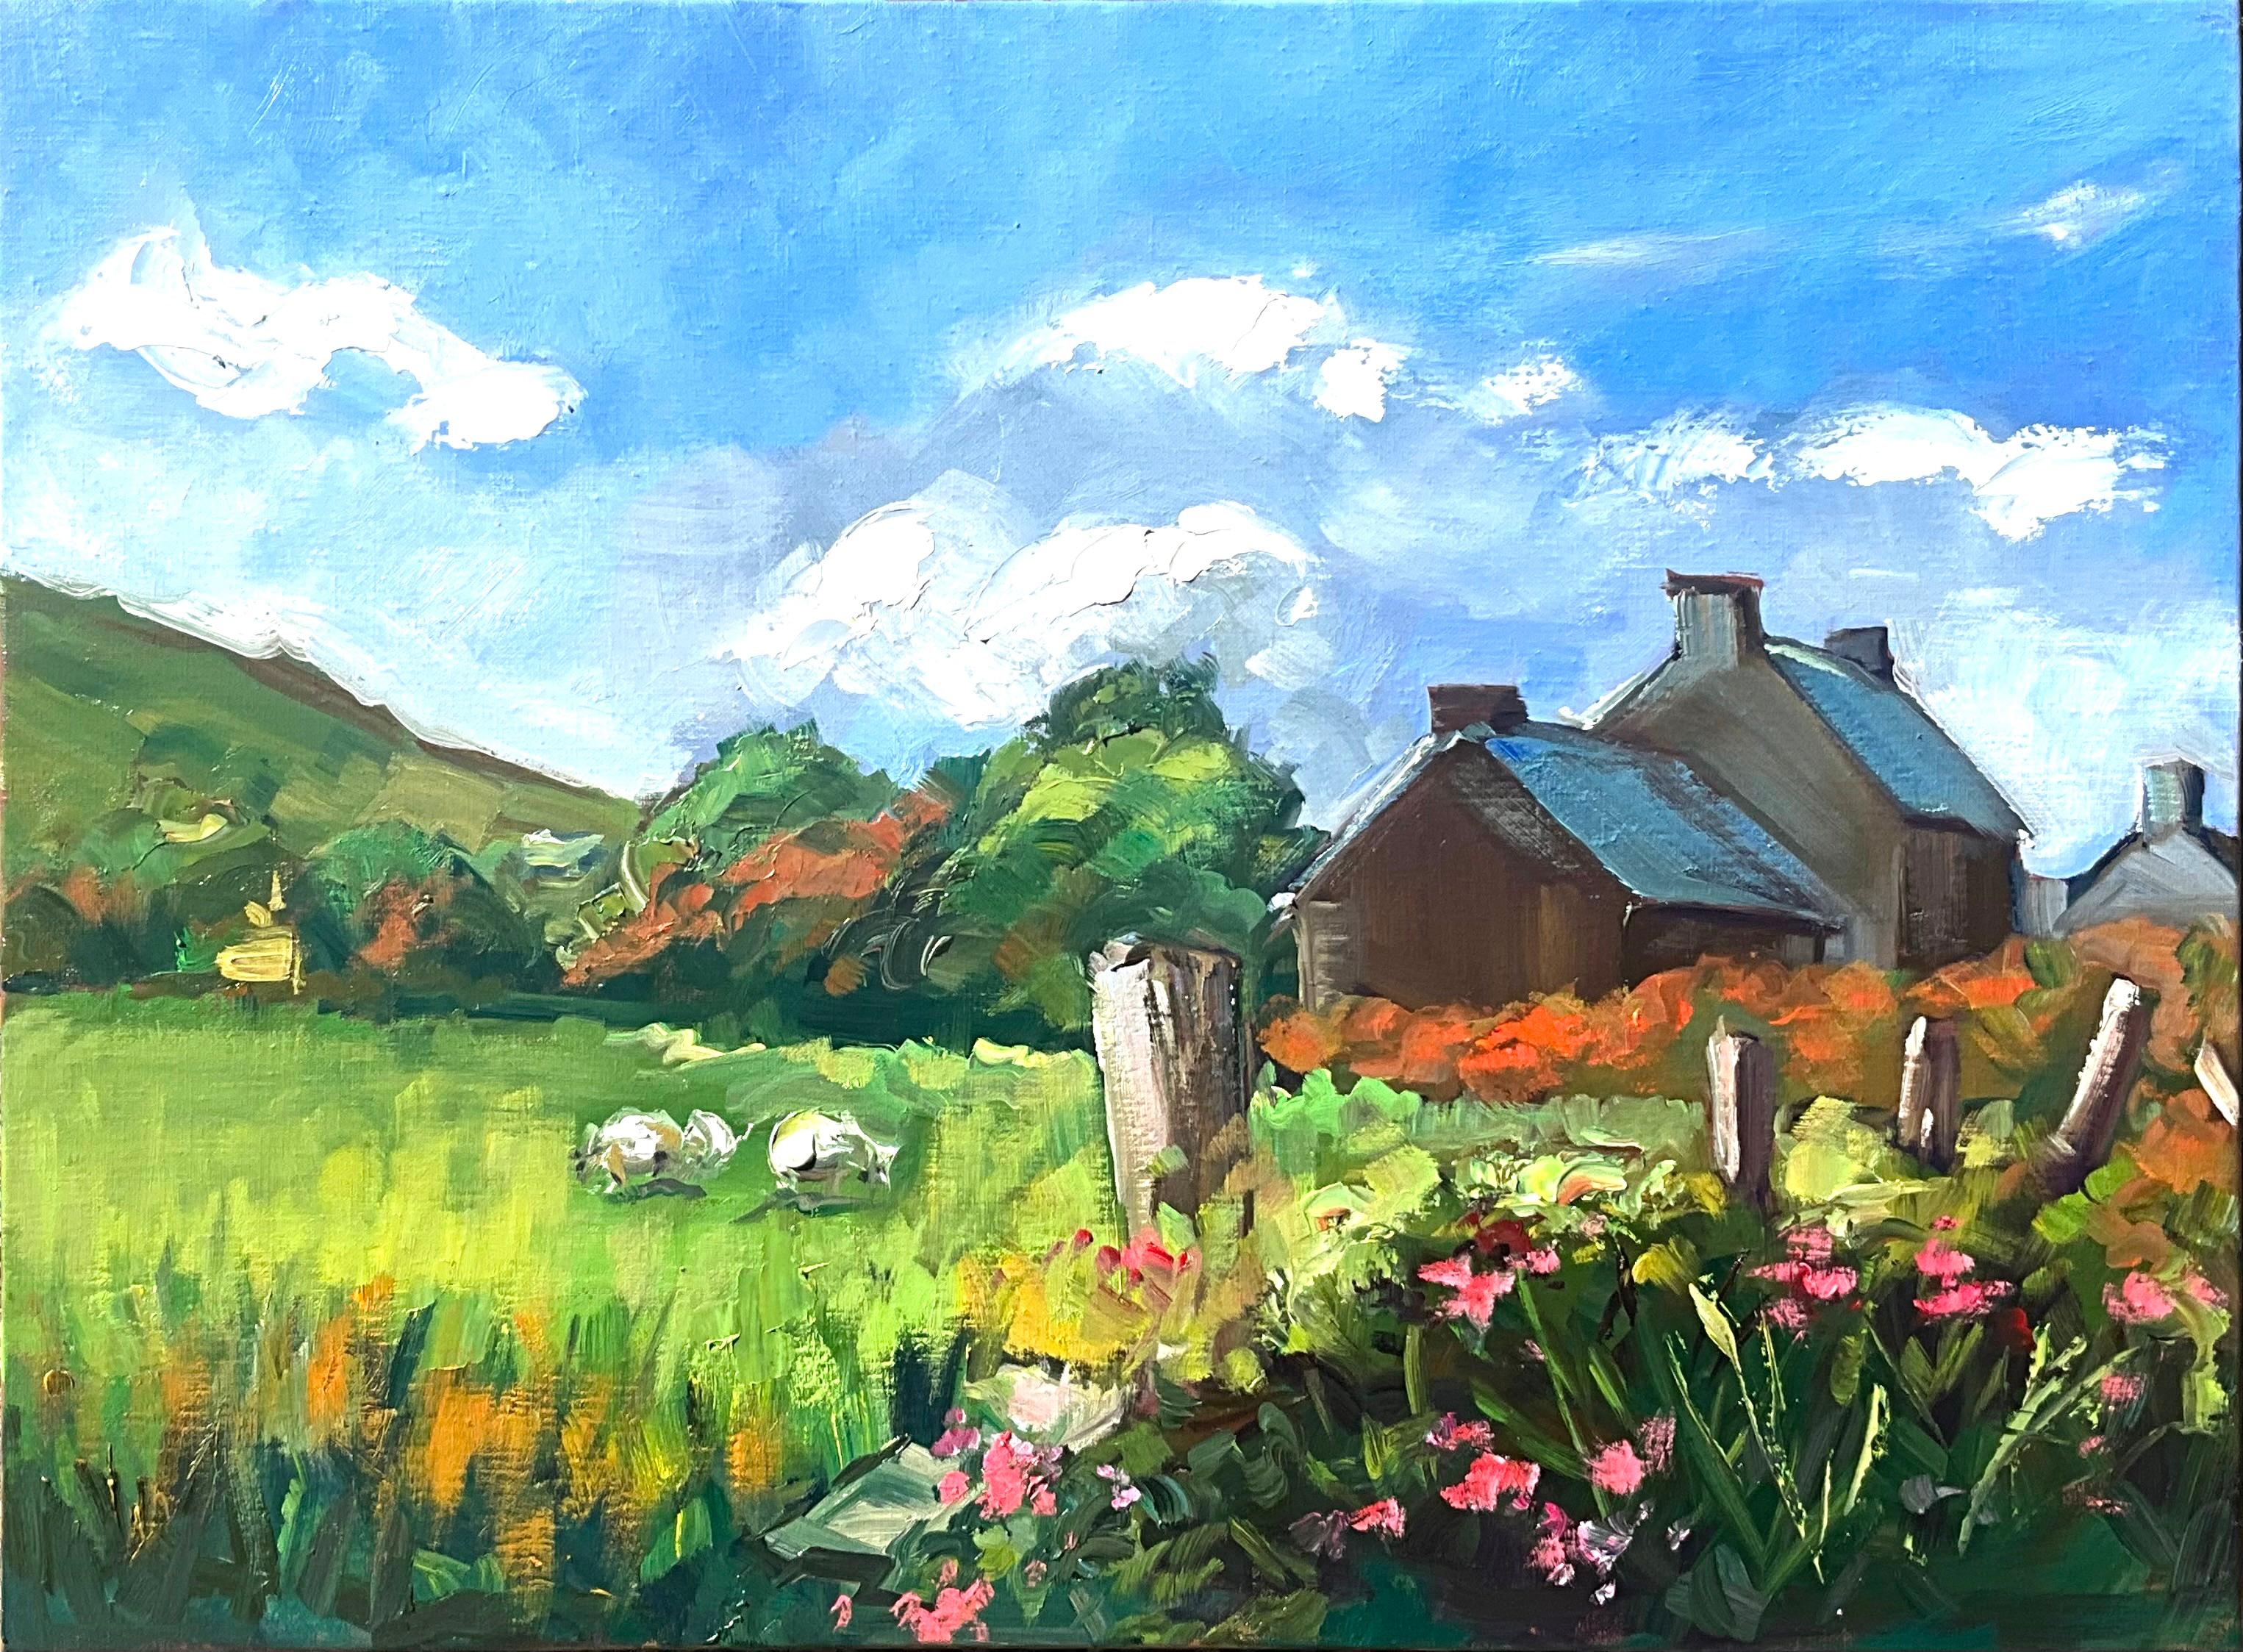 Maria Bertrán Landscape Painting - "House In The West of Ireland" Contemporary Impressionist Oil of Ireland